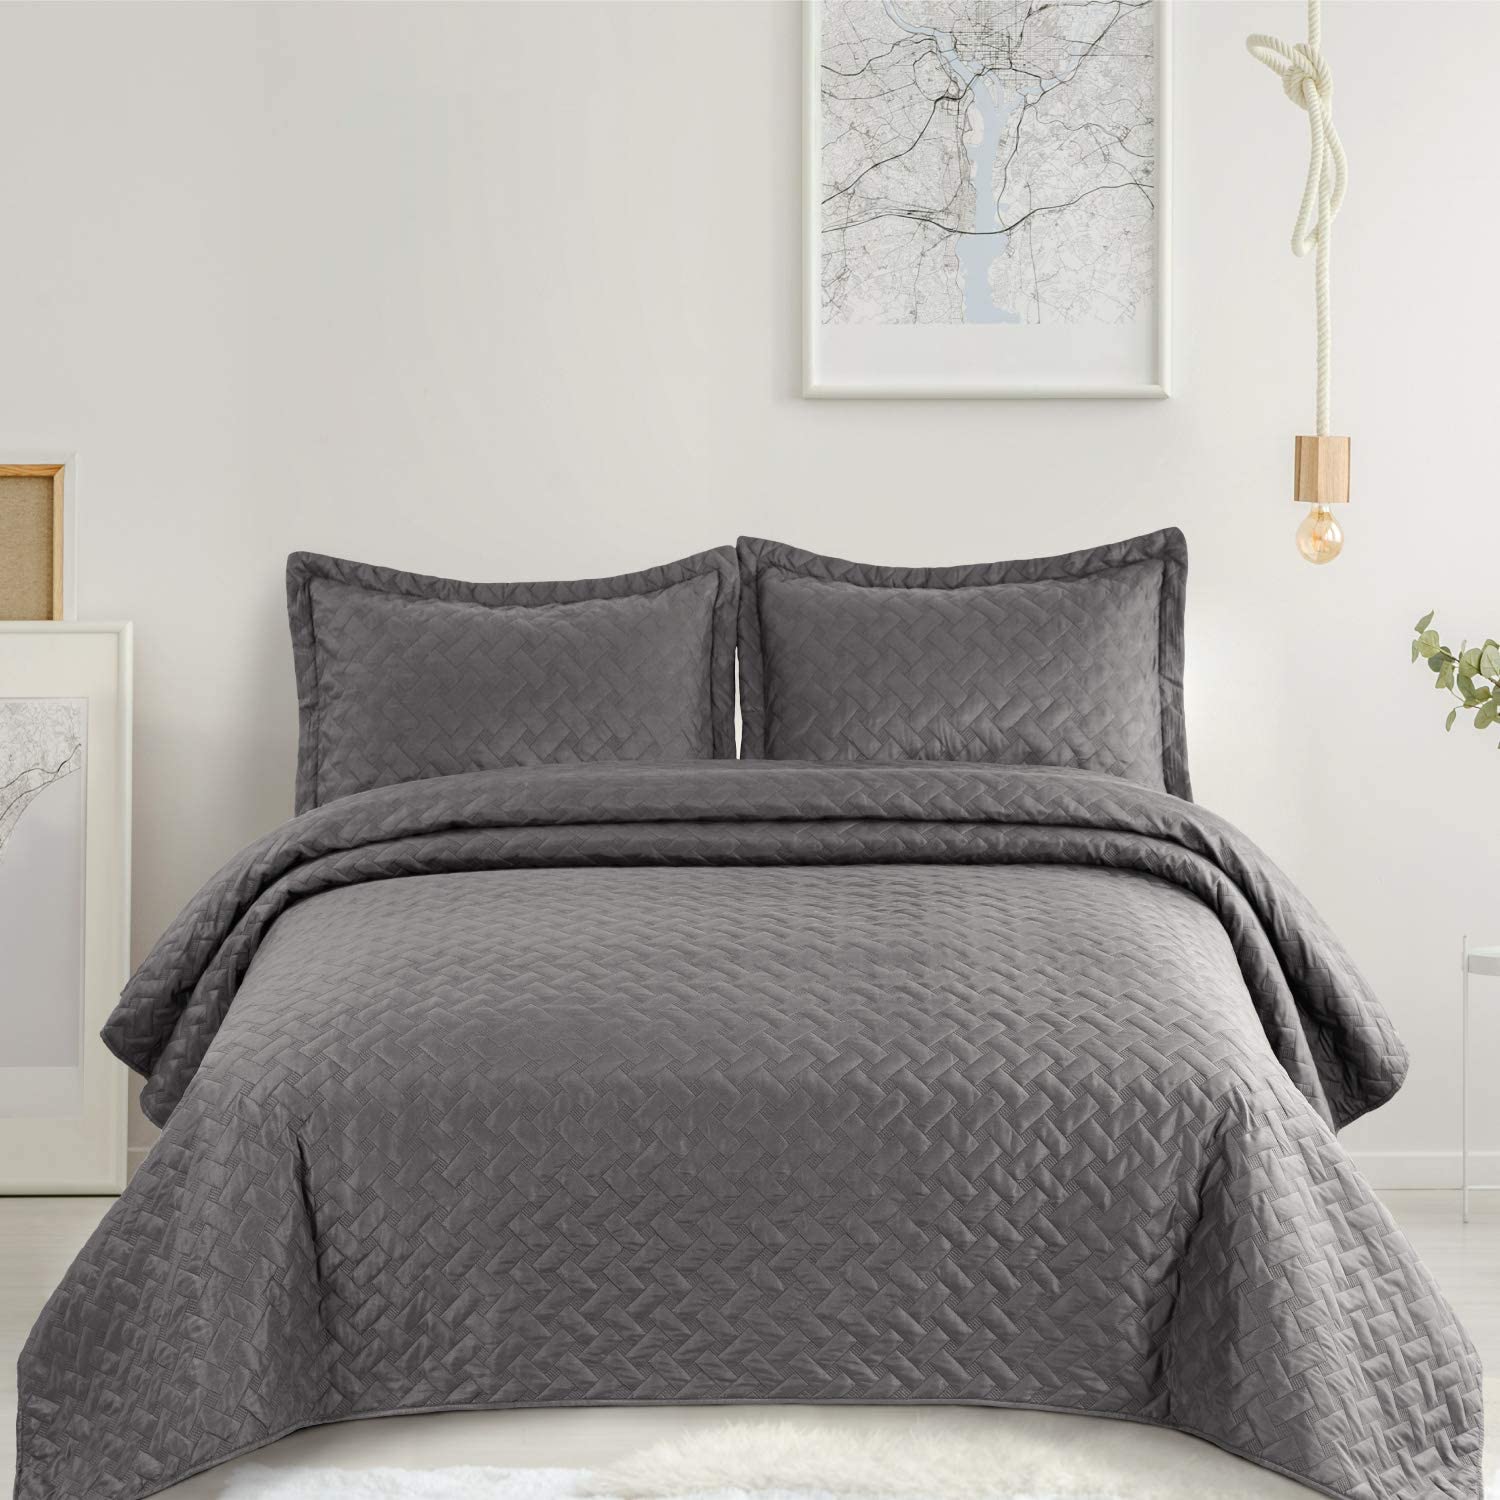 Bedsure Quilt Sets Queen Grey Bedspreads Full Size - for Queen Bed ...